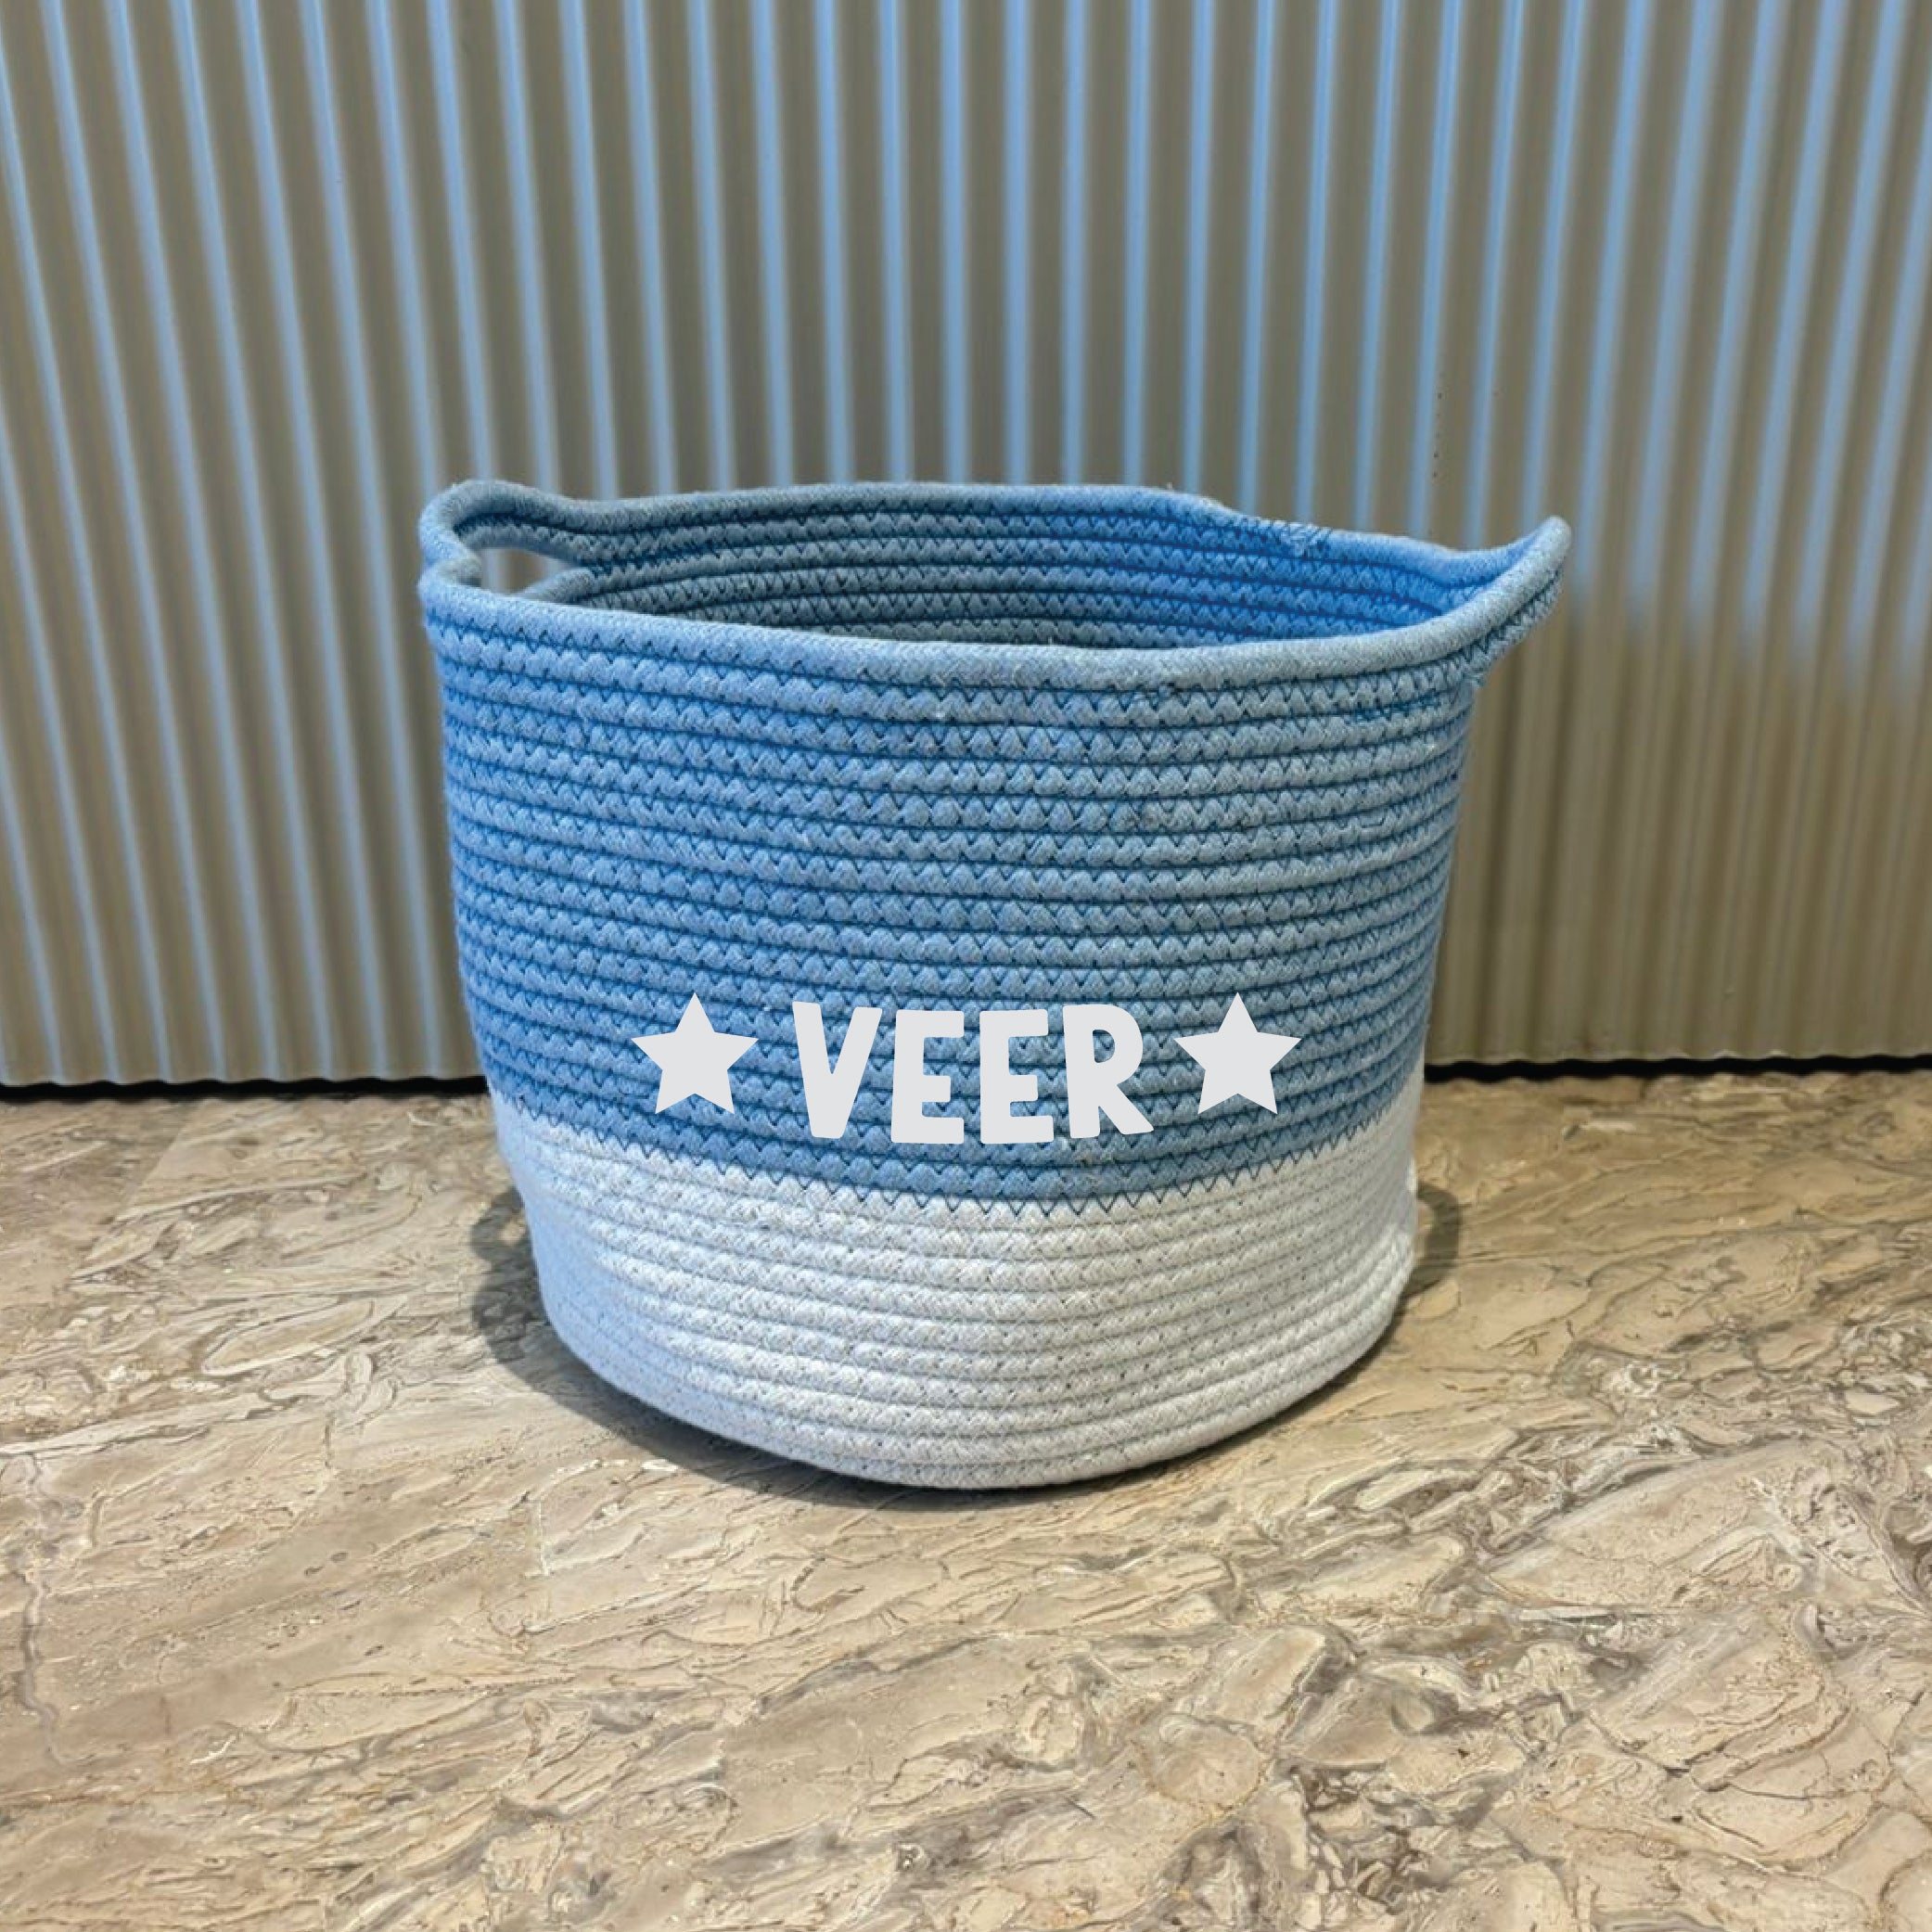 Personalised Storage Basket - Small, Blue <br> CLEARANCE SALE